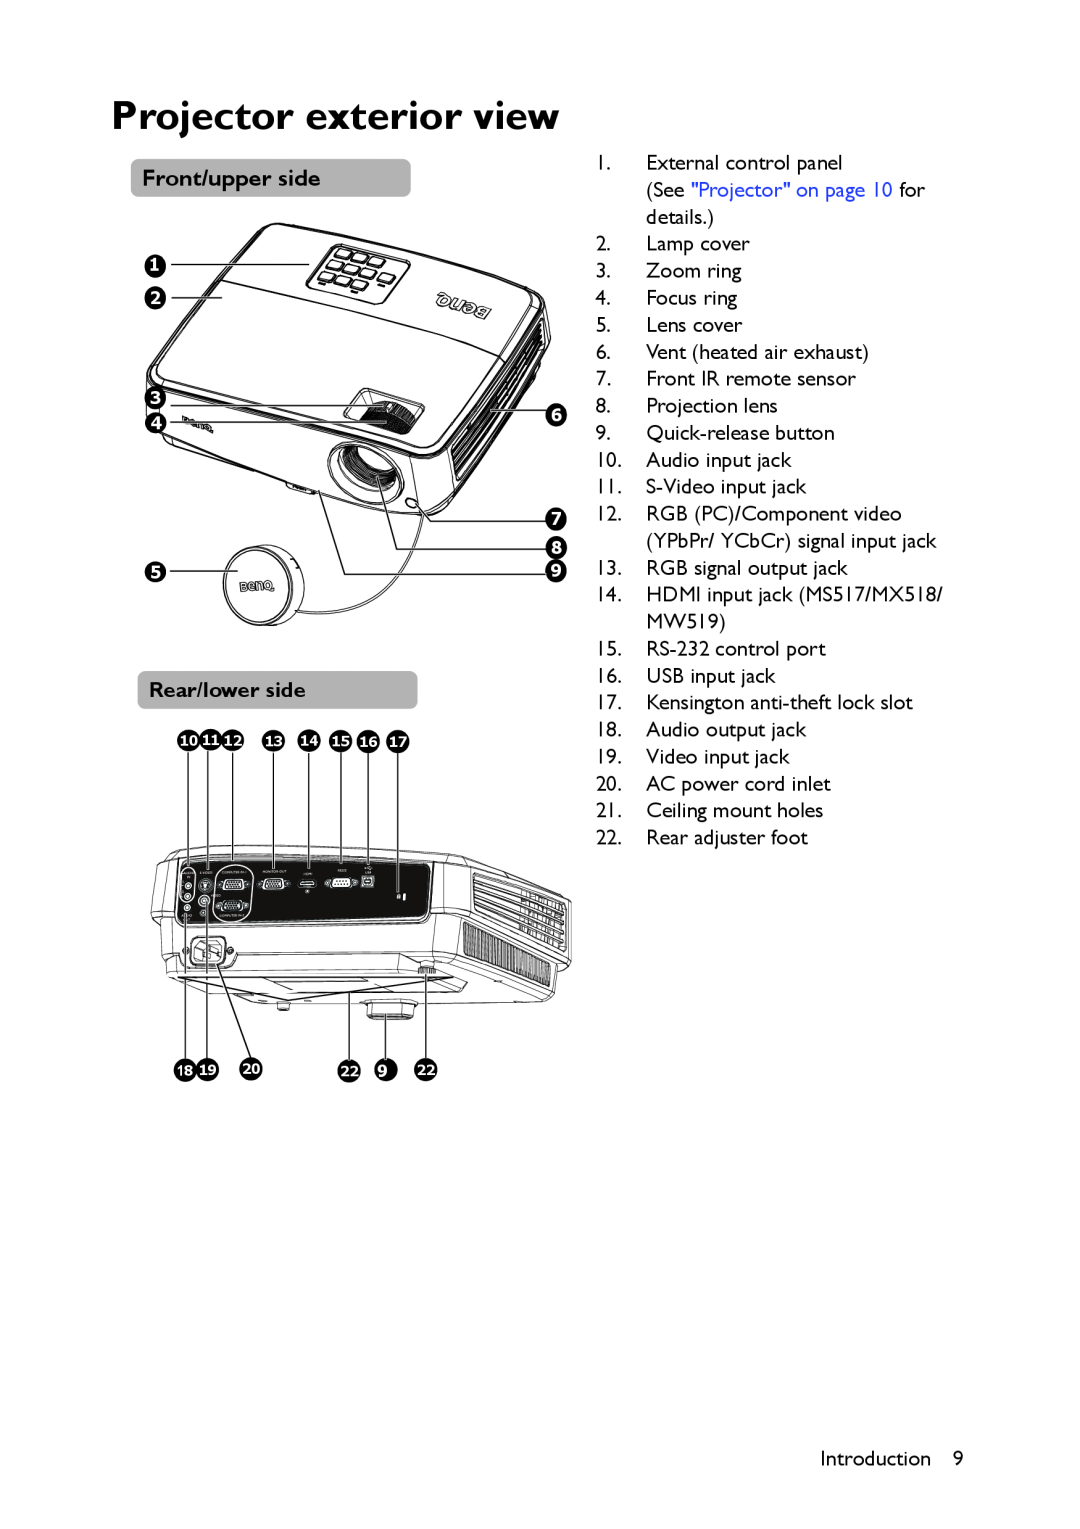 BenQ MS517 user manual Projector exterior view, Front/upper side, See Projector on page 10 for details 